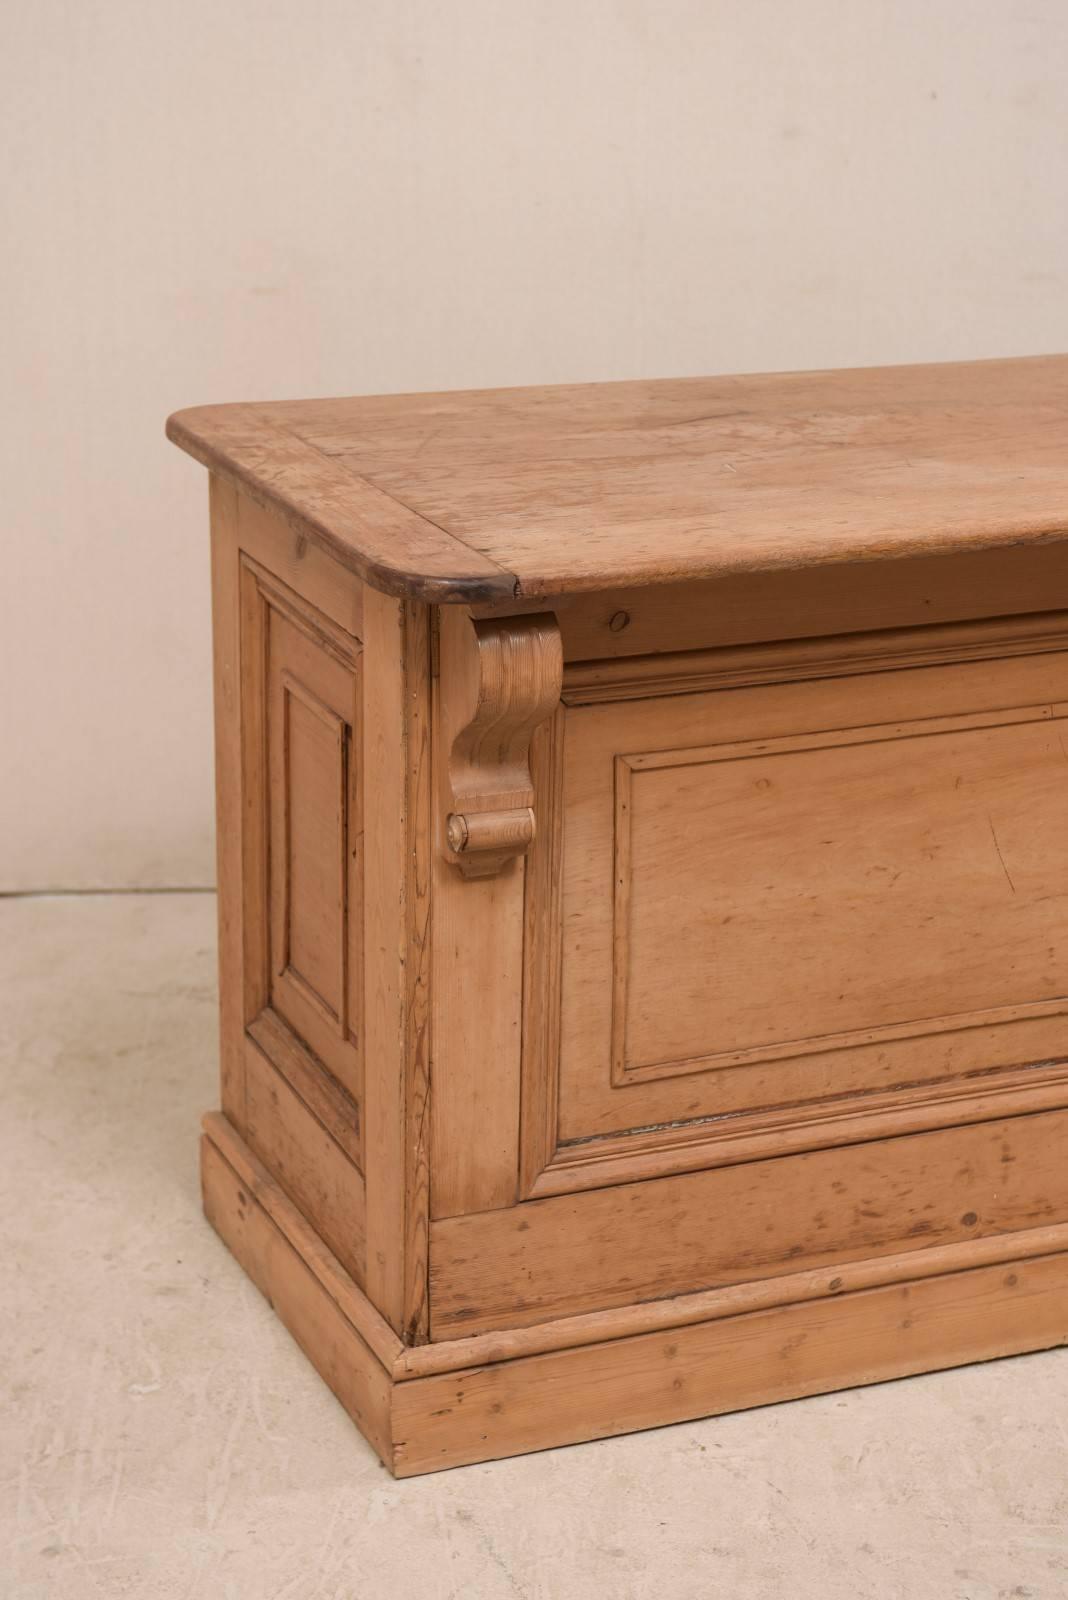 Carved 19th Century English Natural Wood Kitchen Island with Ample Storage